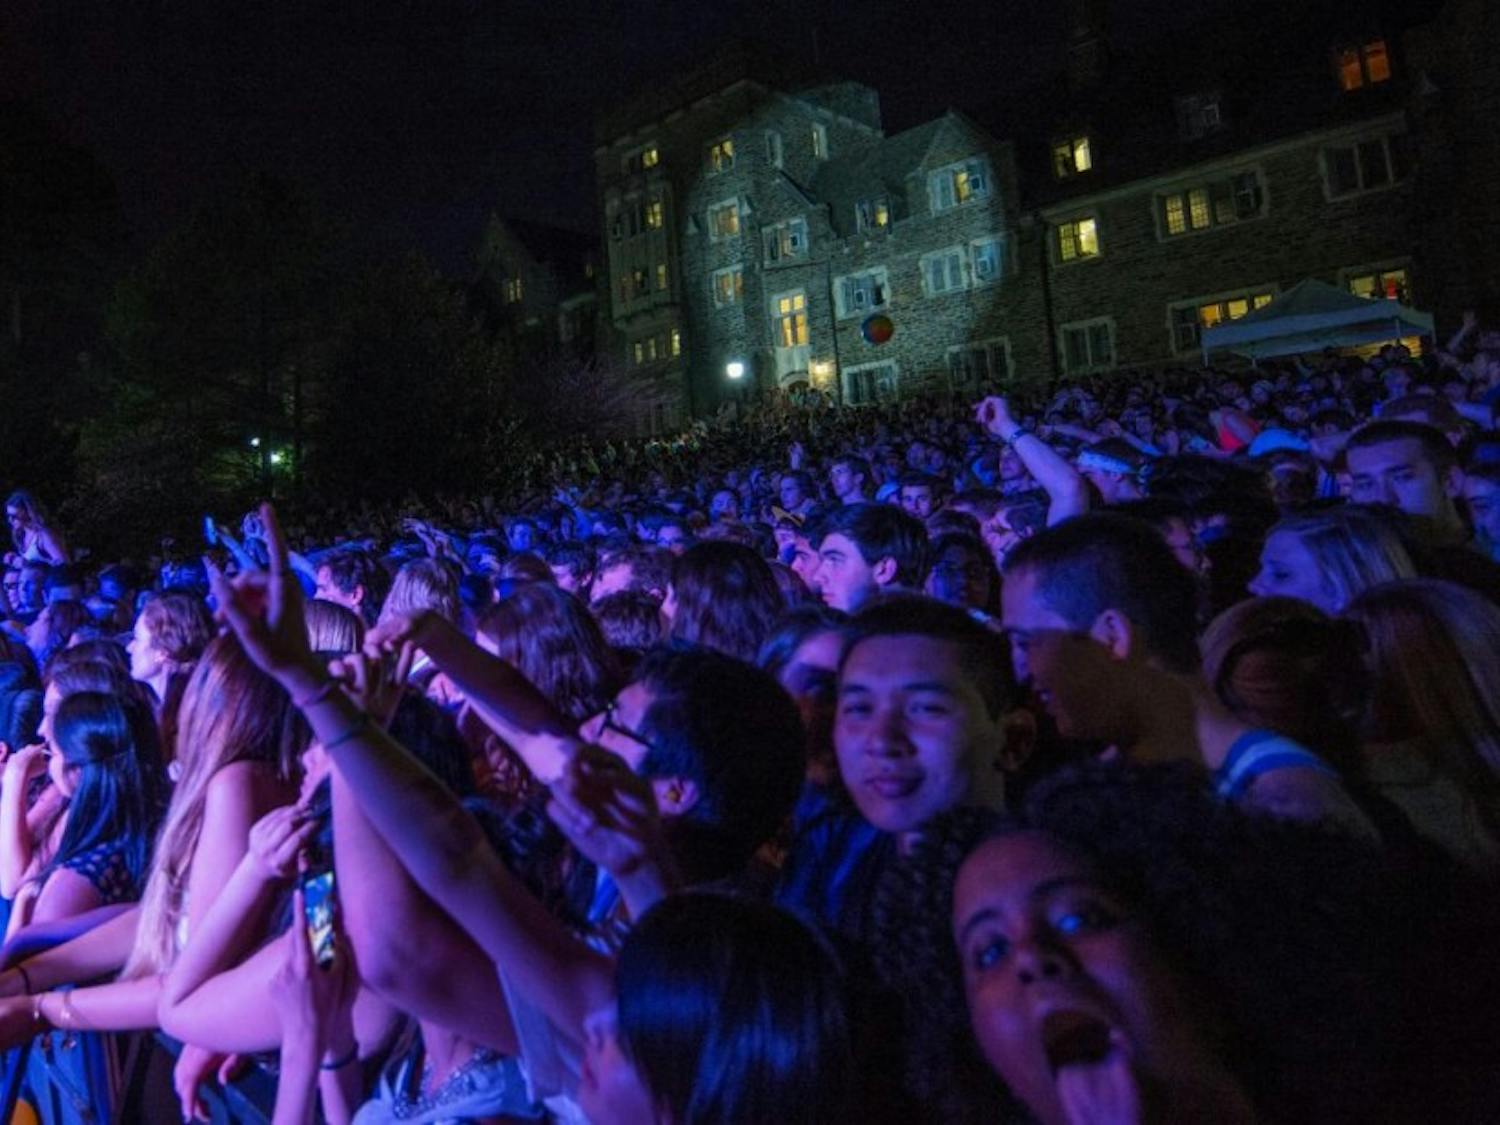 Students enjoyed previous Old Duke concerts featuring Bowling for Soup and Vanessa Carlton.&nbsp;